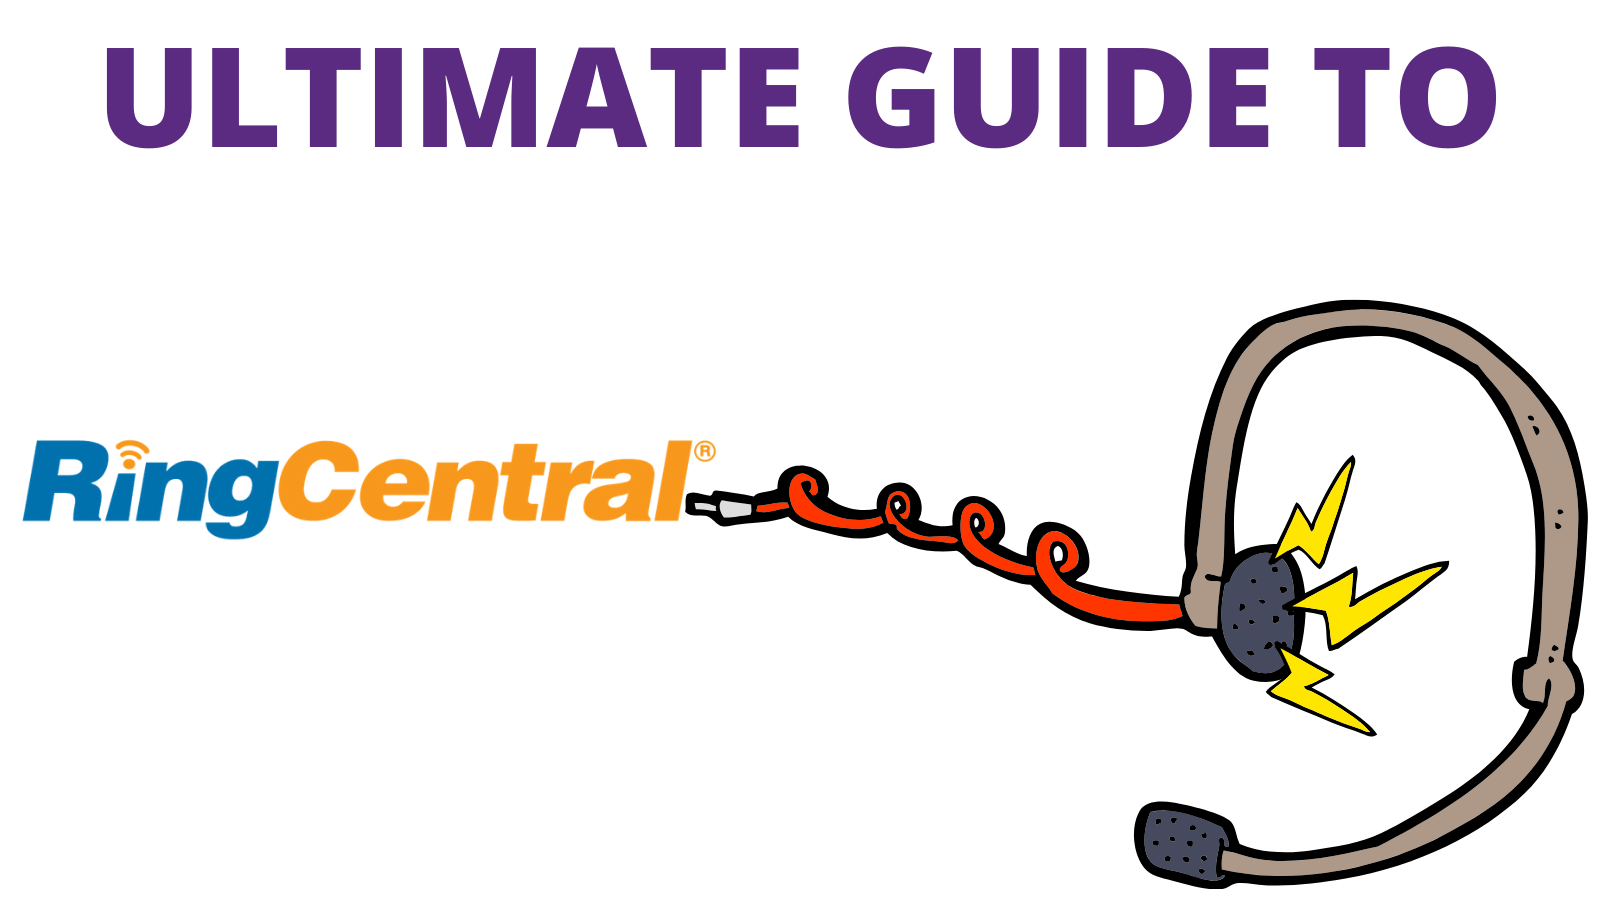 ULTIMATE Guide to Using Headsets with Ring Central - Headset Advisor